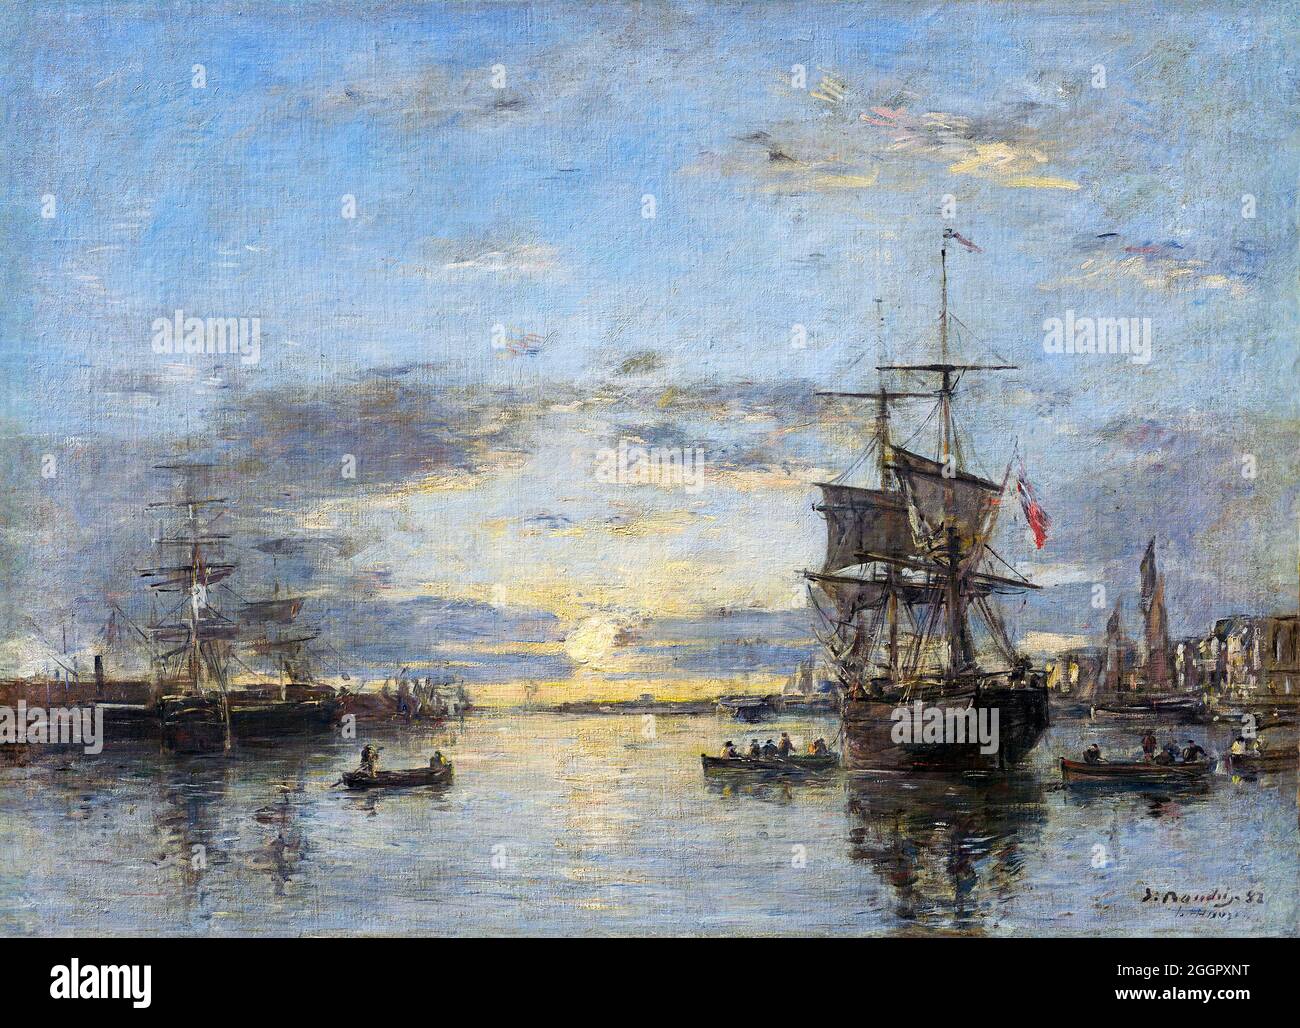 Eugène Boudin (1824-1898) 'Le Havre: The Outer Harbour at Sunset', Öl auf Leinwand, 1882 Stockfoto